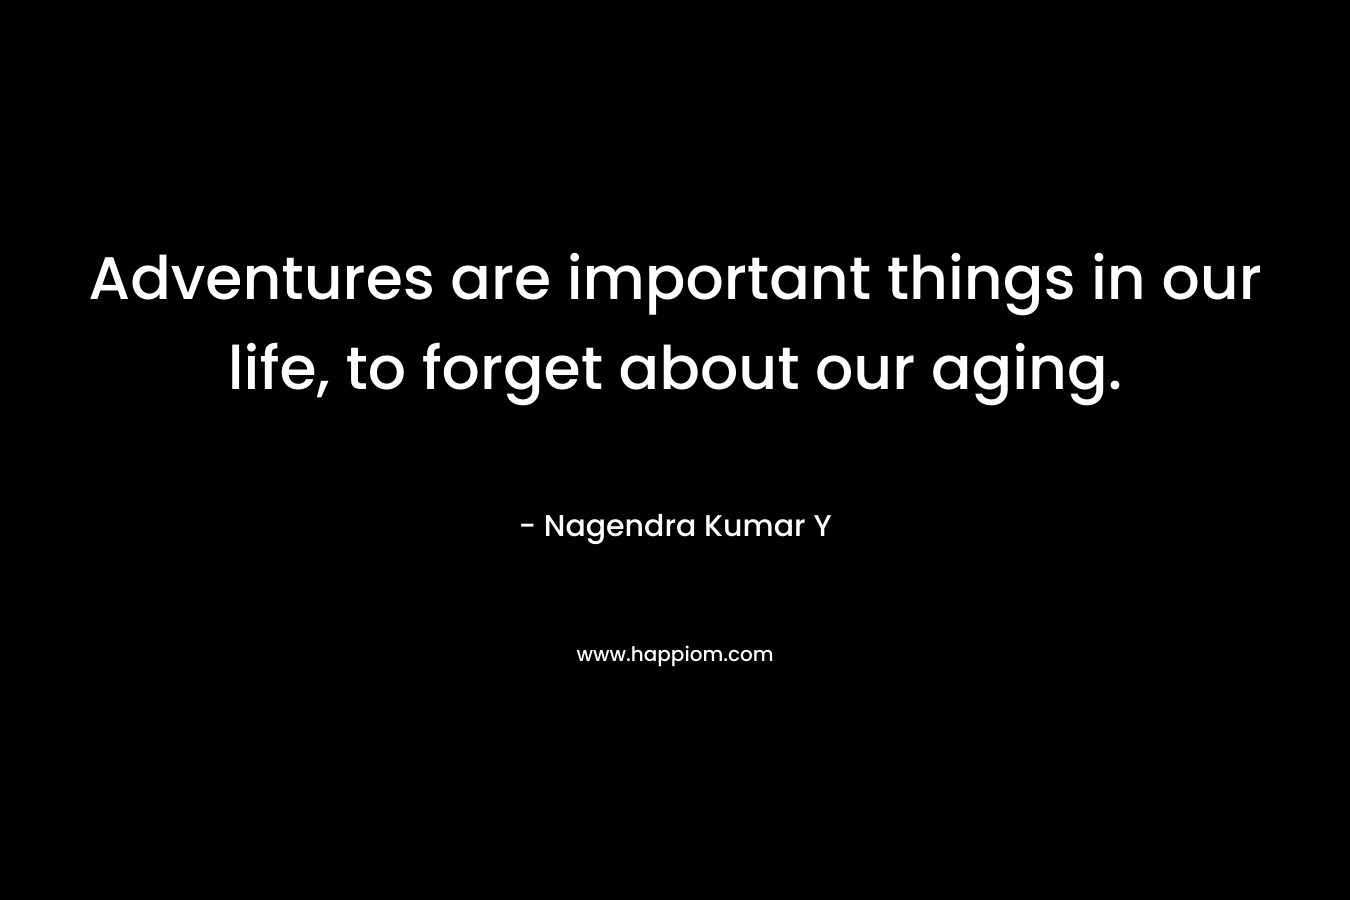 Adventures are important things in our life, to forget about our aging. – Nagendra Kumar Y